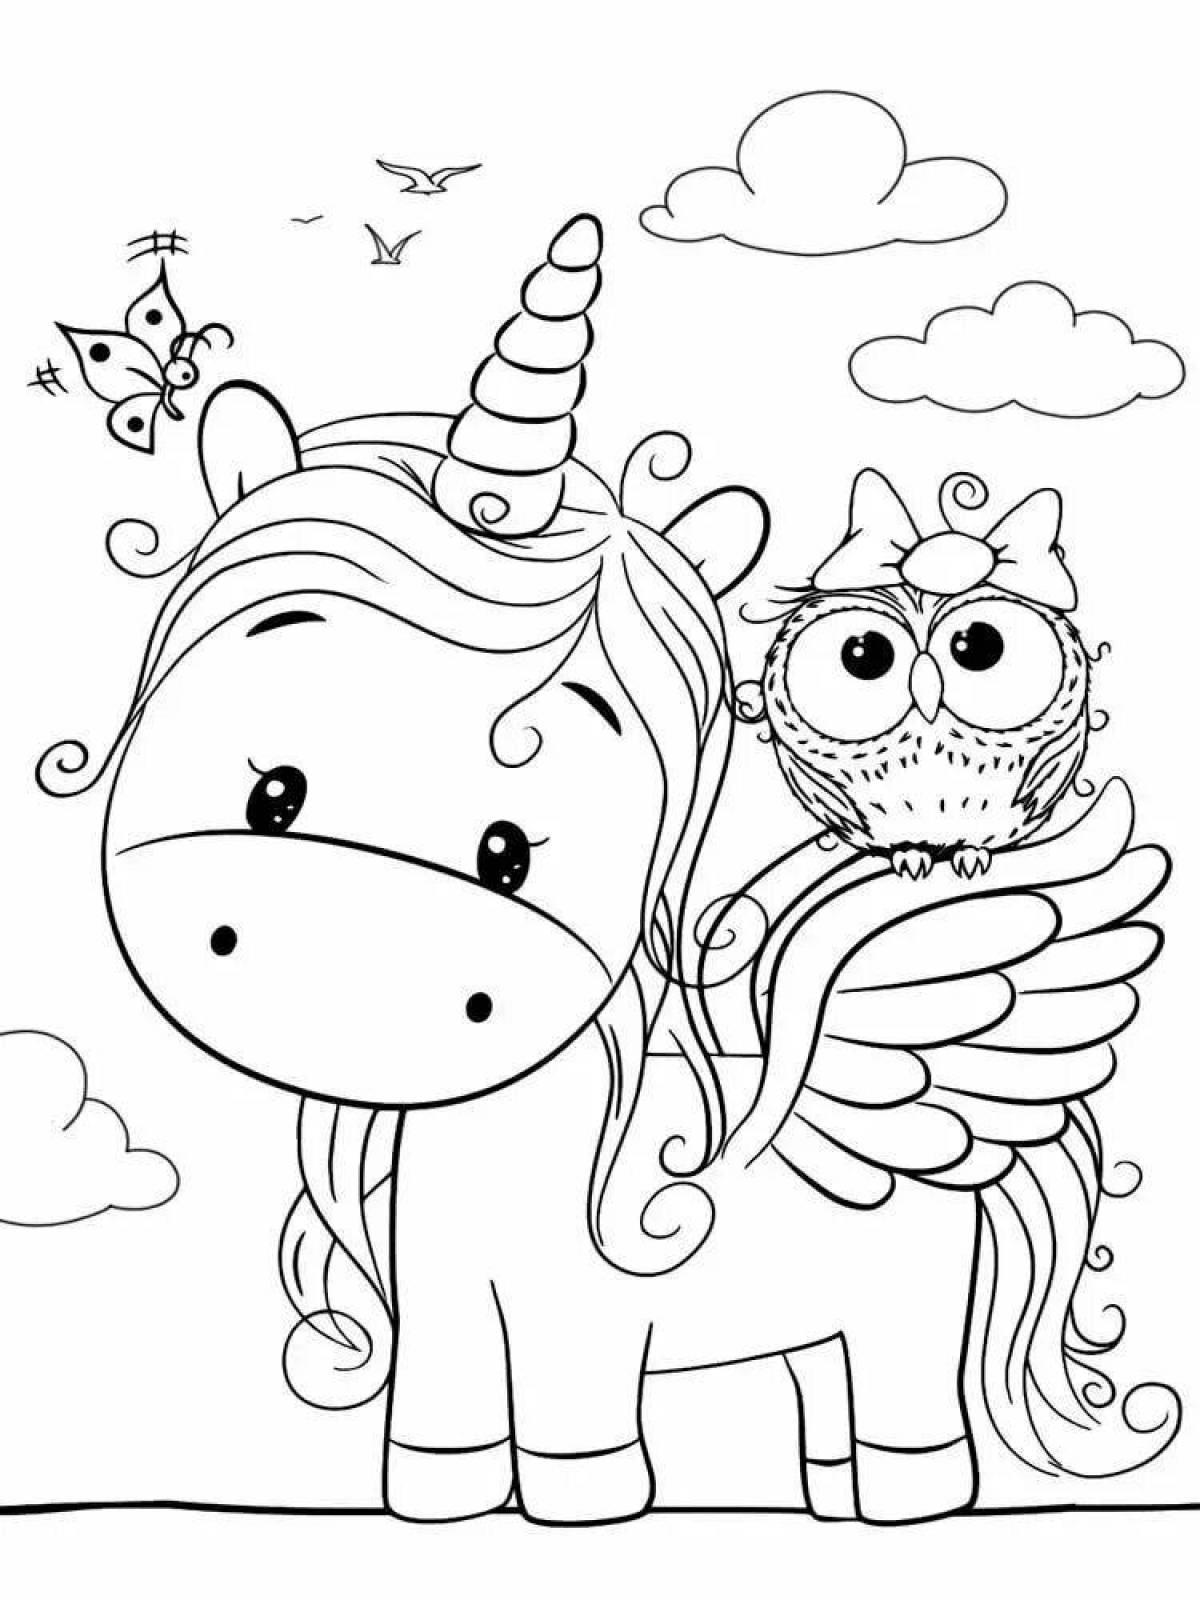 Live coloring for girls with 9 year old animals